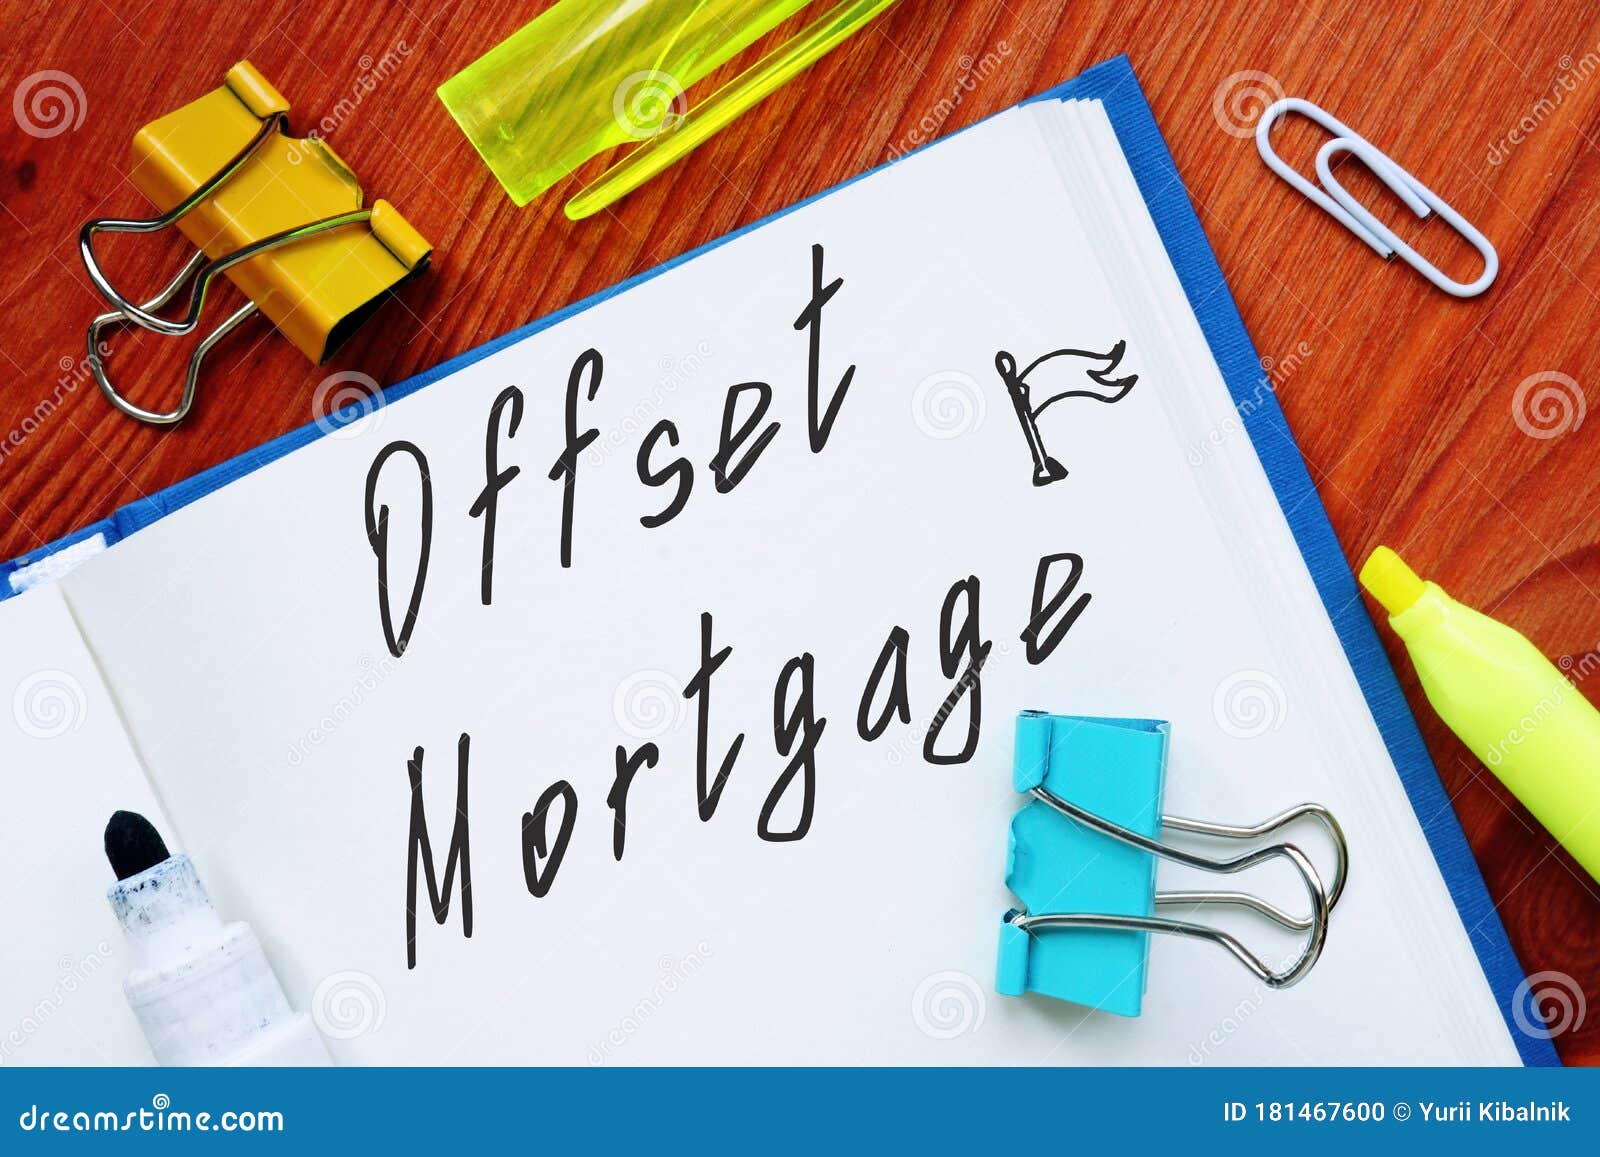 Business Concept Meaning Piggyback Mortgage Phrase Stock Photo 1865000746